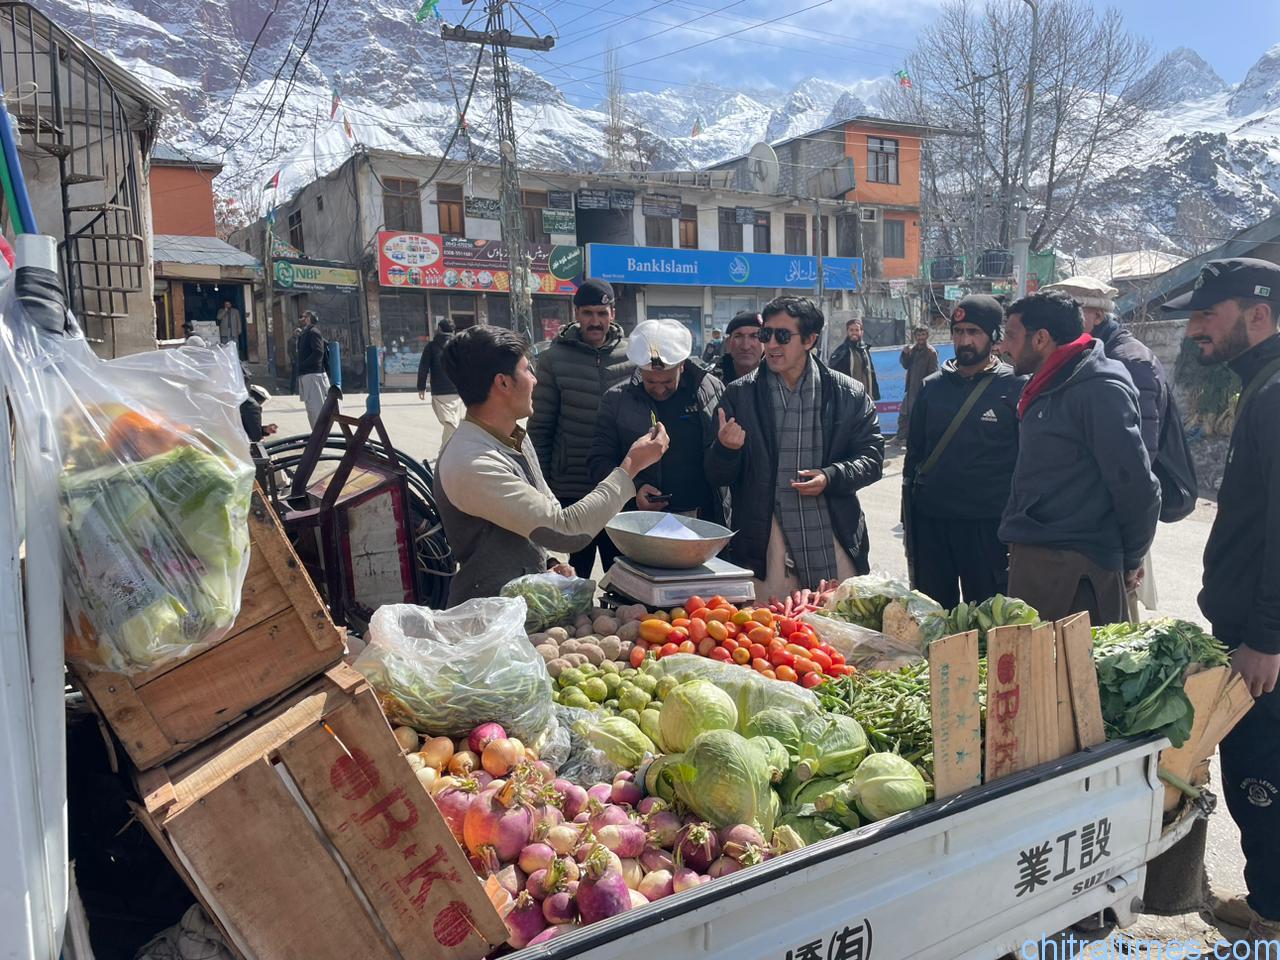 chitraltimes upper chitral administration price checking booni bazar shops 6